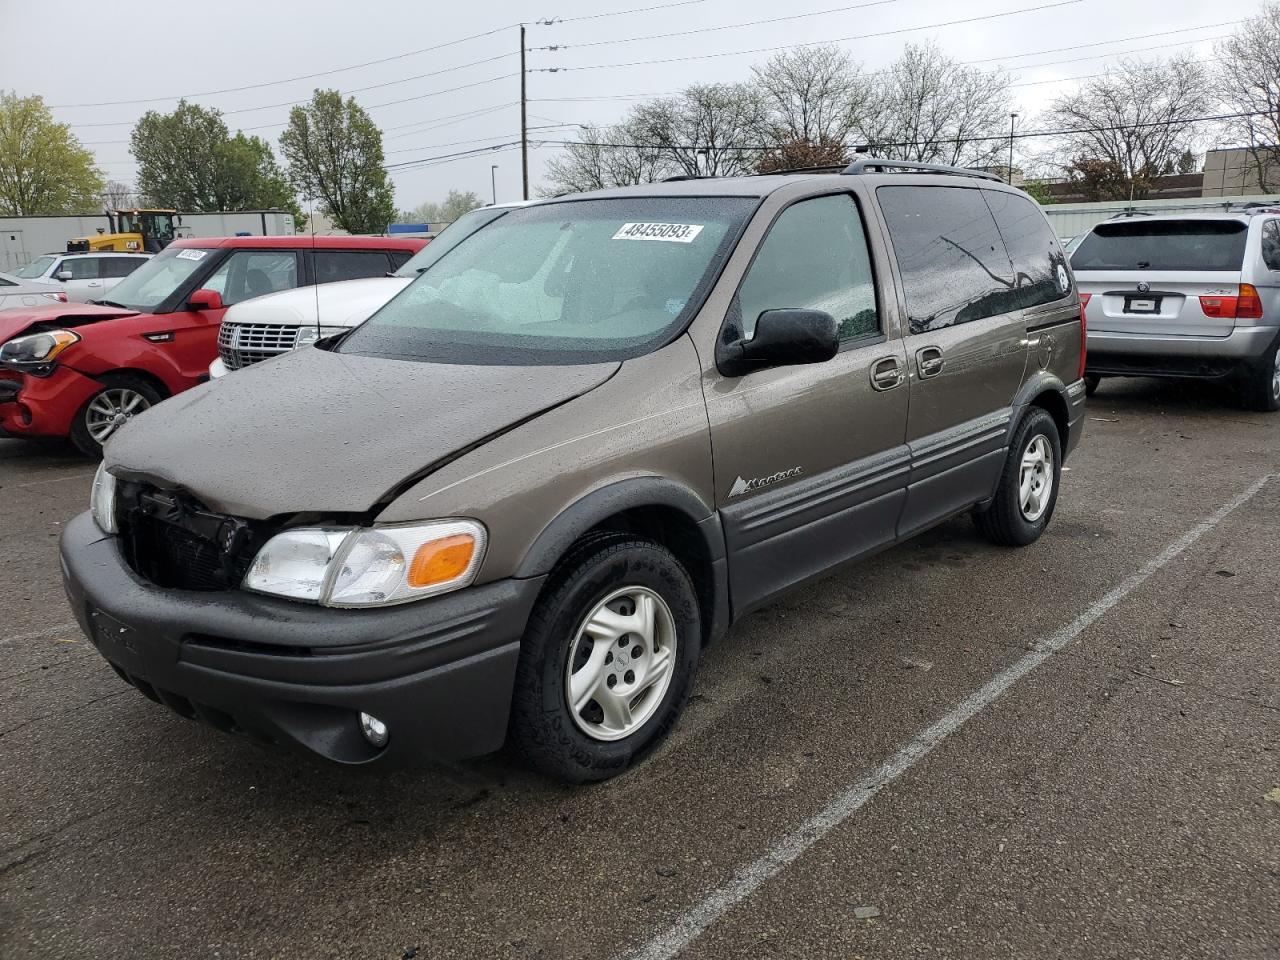 2002 Pontiac Montana Economy for sale at Copart Moraine, OH Lot #48455*** |  SalvageReseller.com